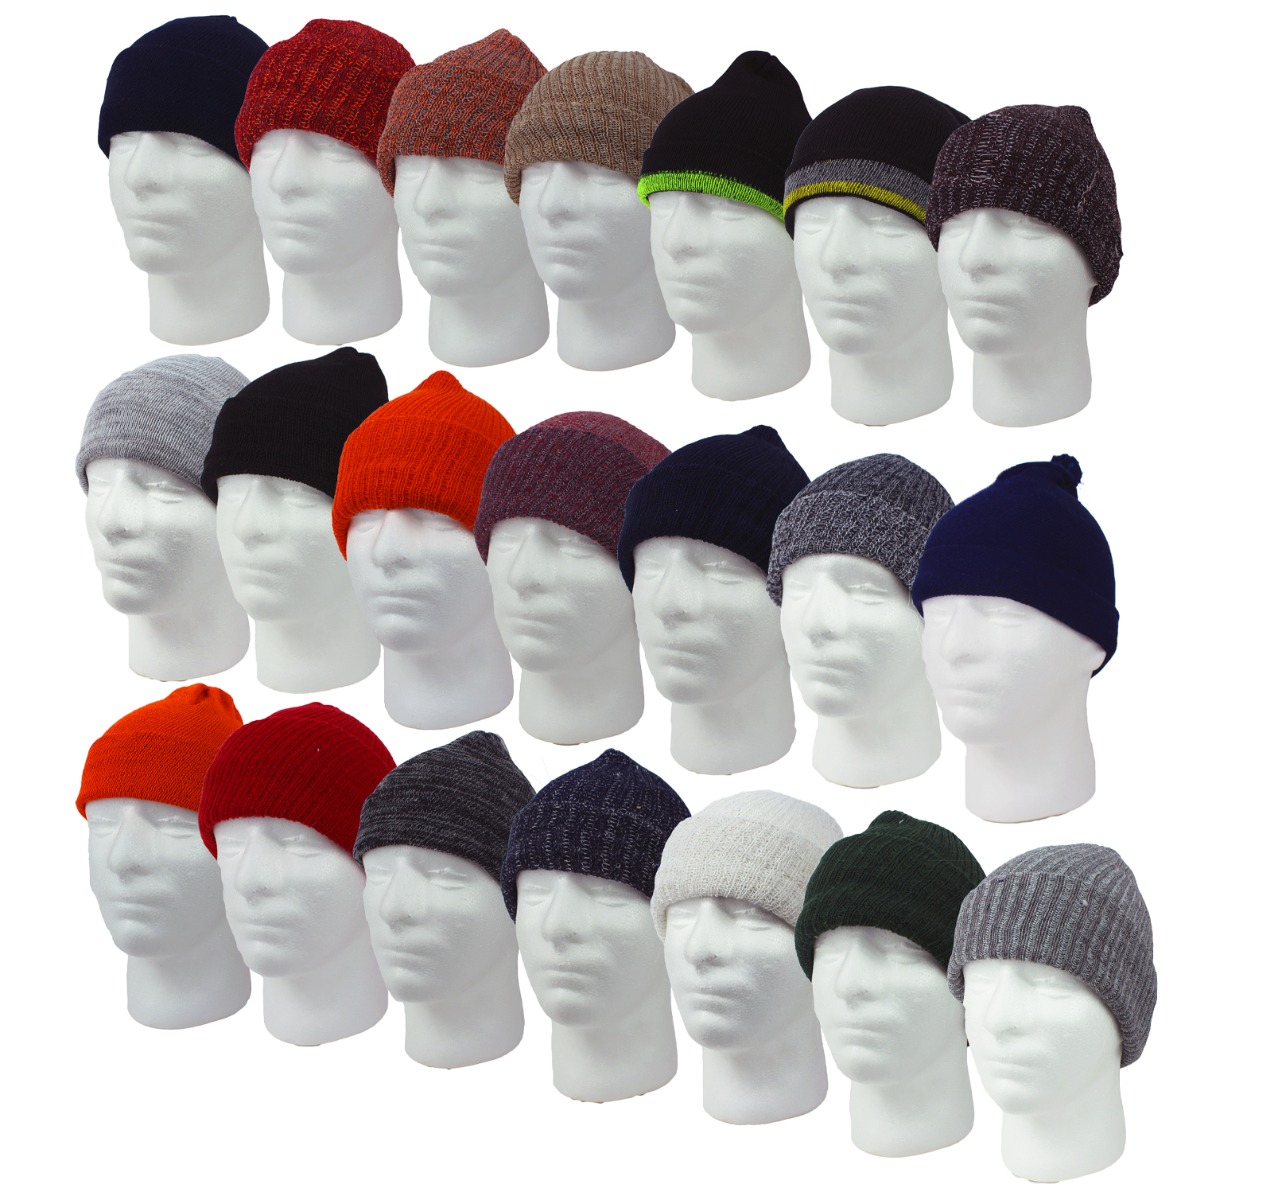 Adult Winter Knit Hats - Assorted Styles & Colors CLOSEOUT